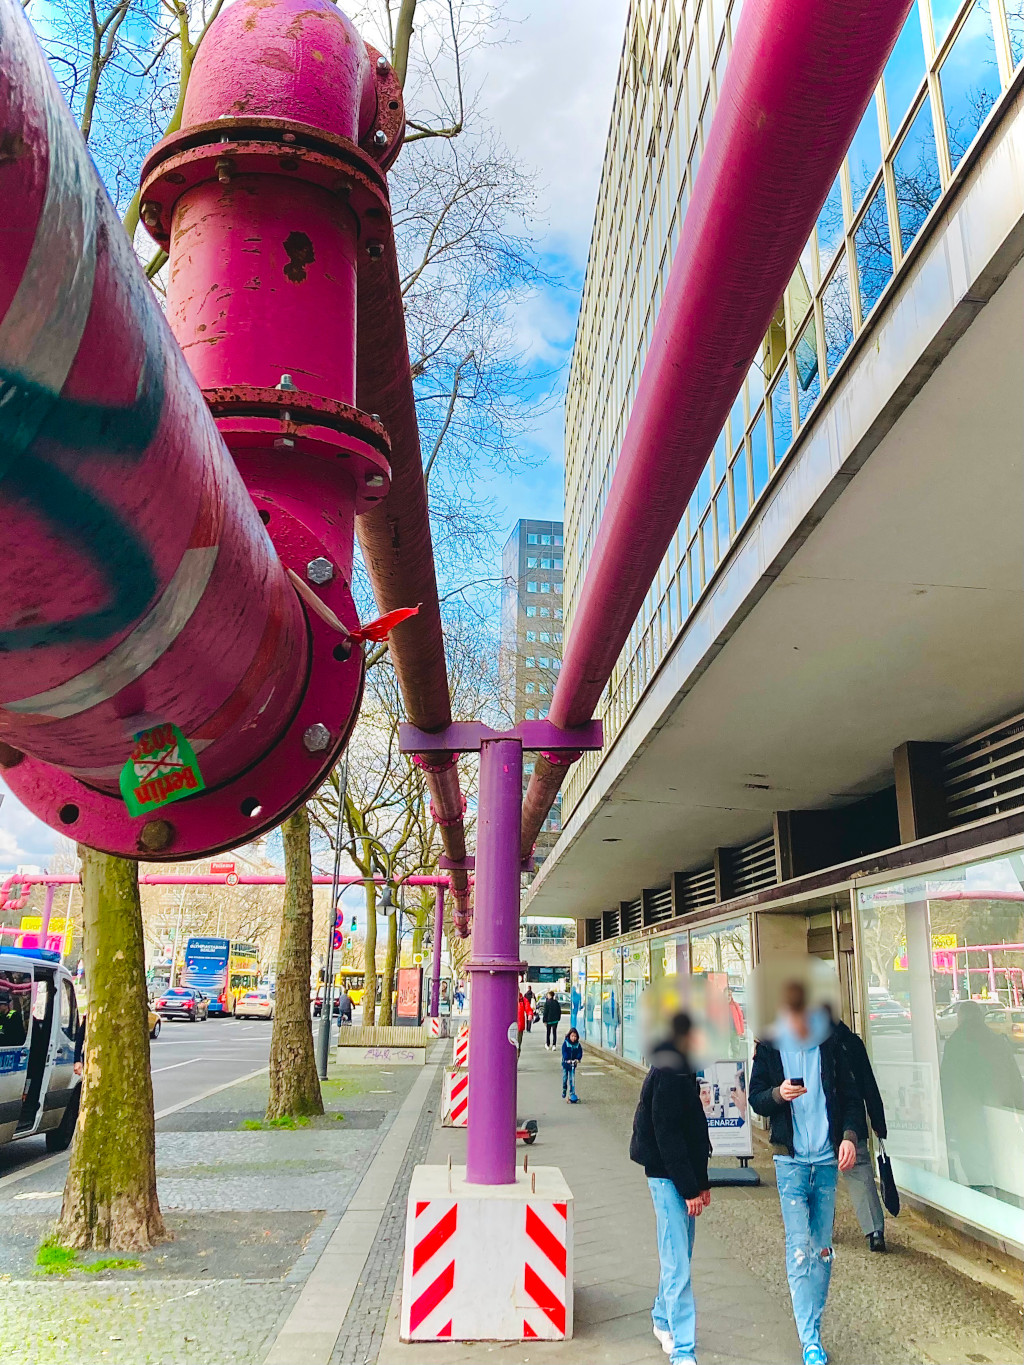 The pink pipes of various sizes near Wittenbergplatz.